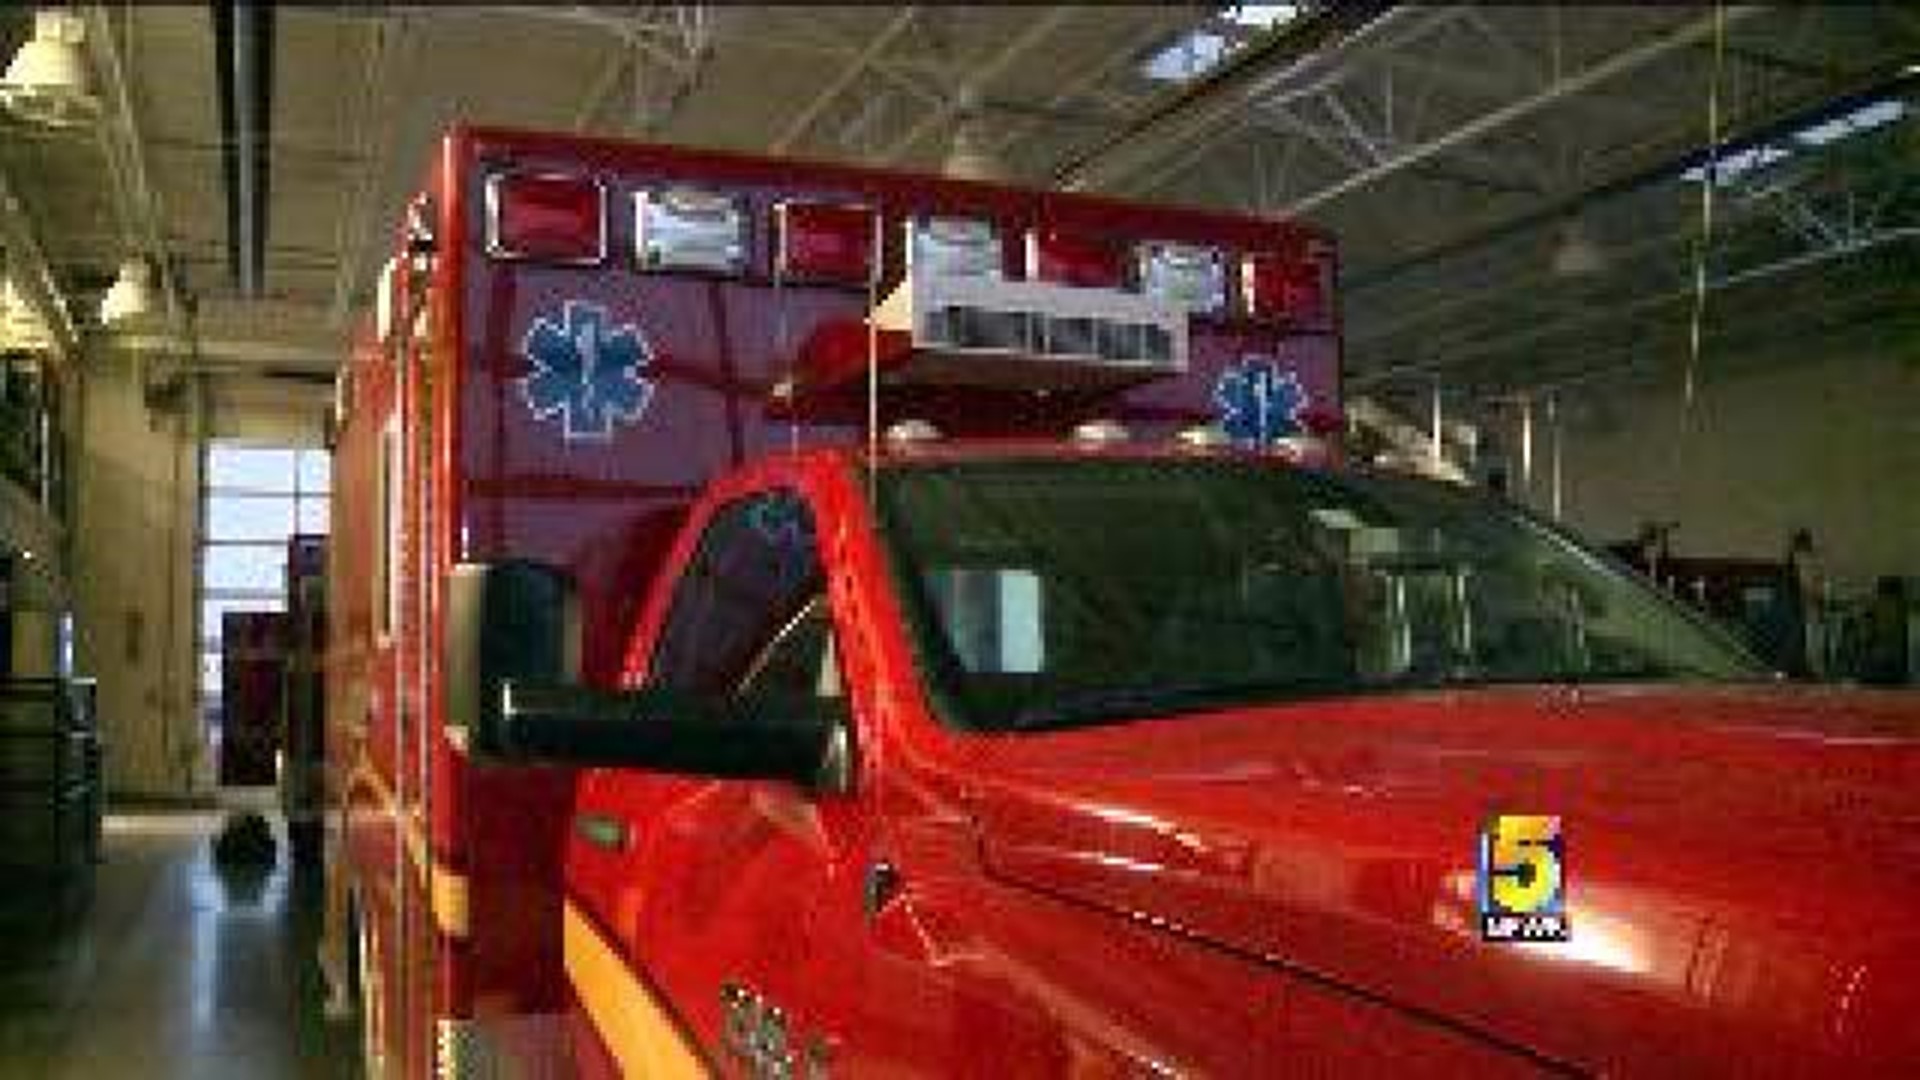 Ambulance Services In Rural Benton County